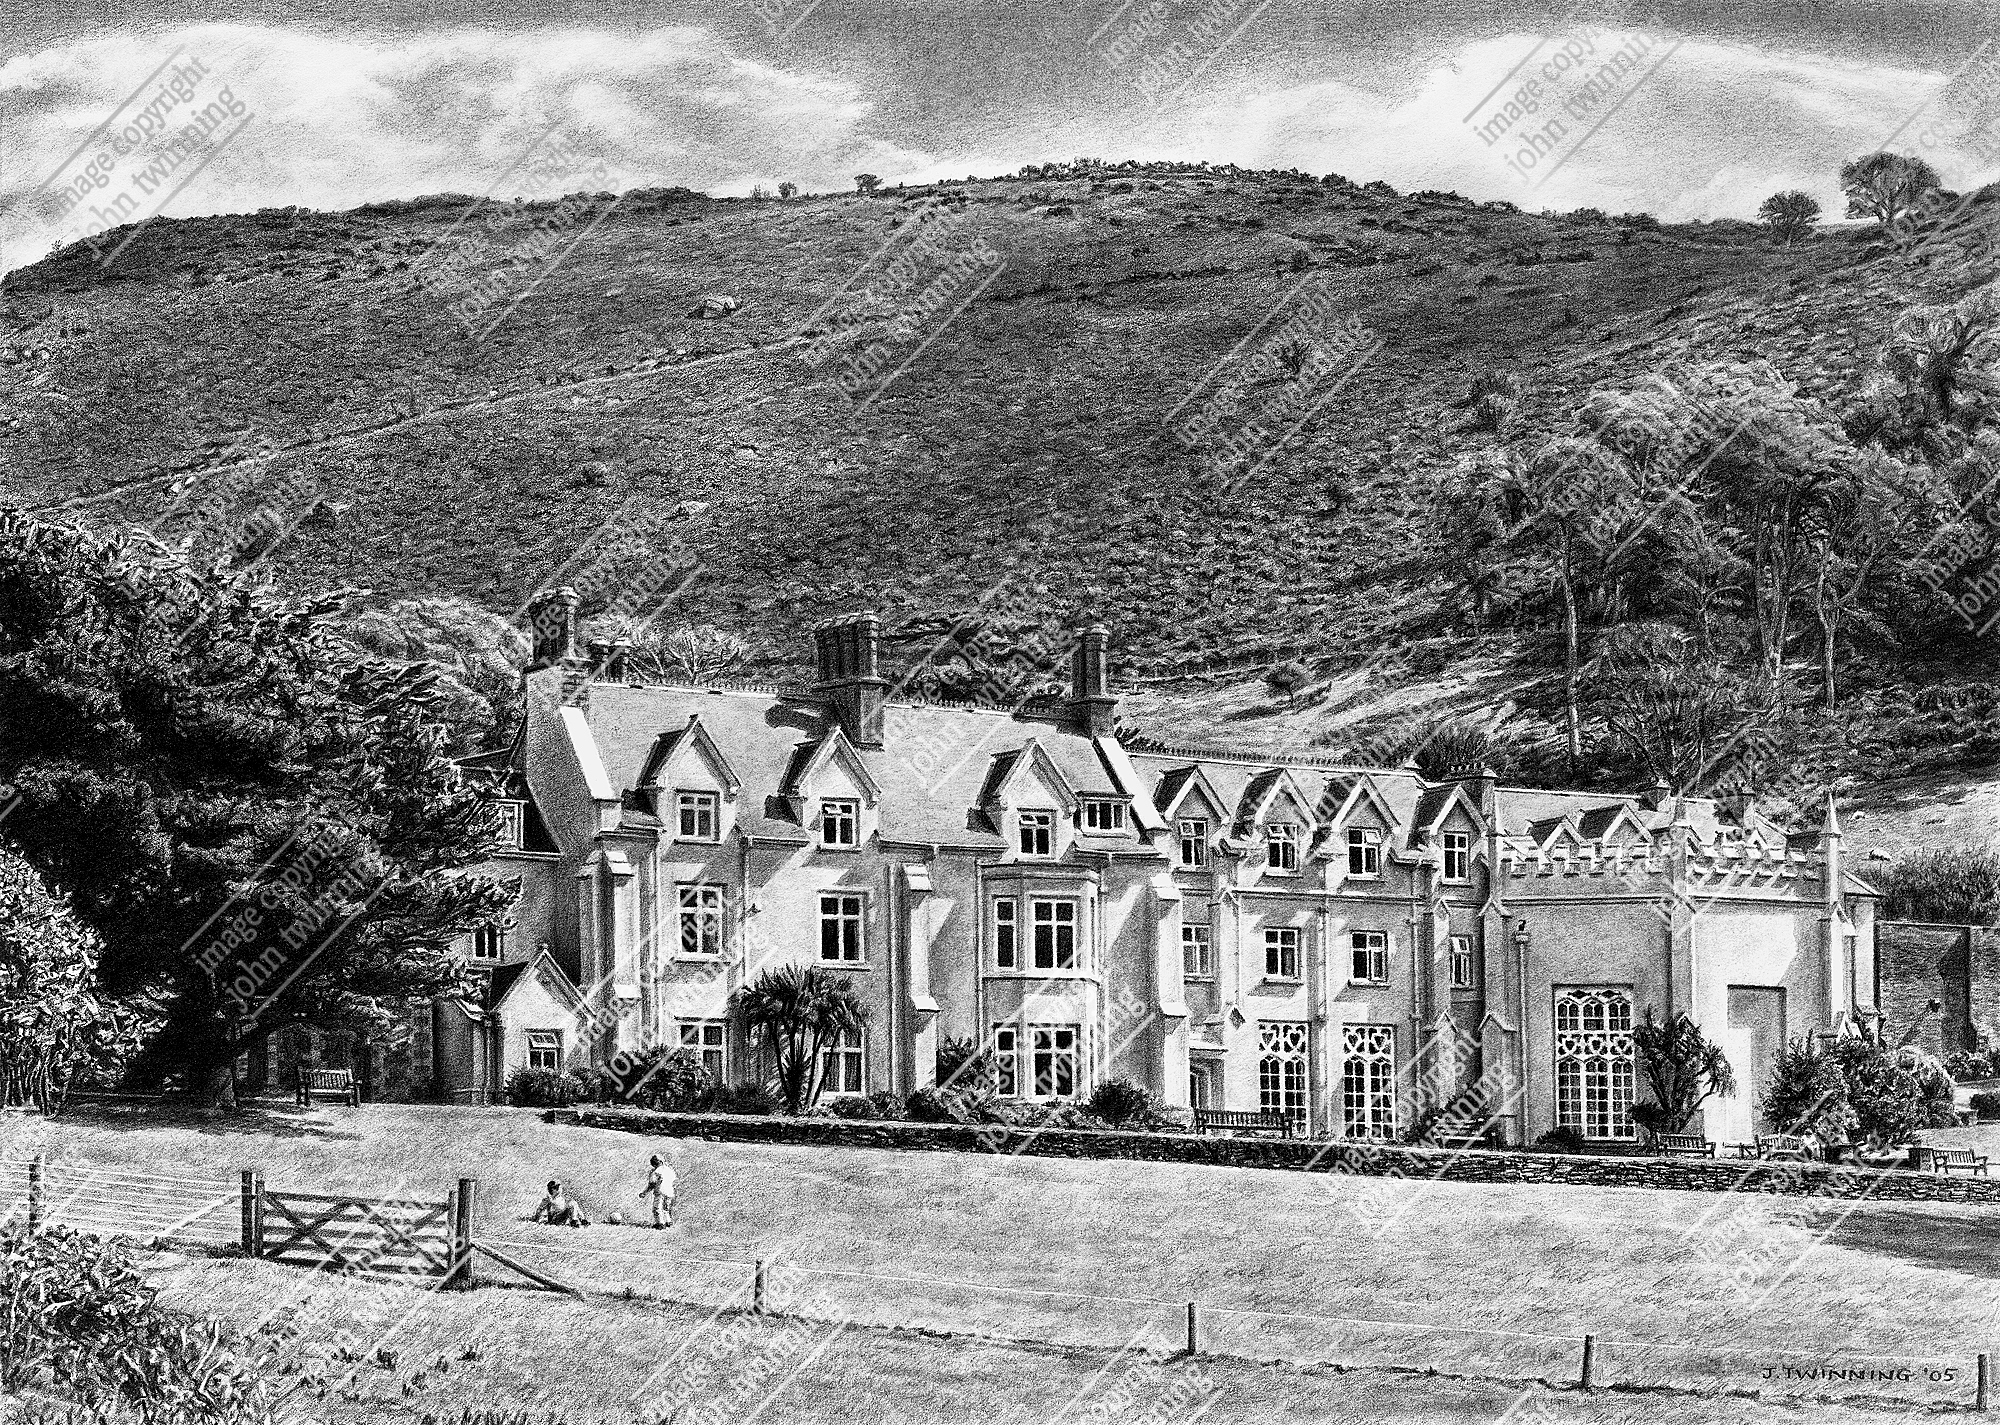 ‘Lee Abbey house from the front lawn’ – art print from a pencil drawing of this north devon based christian retreat centre